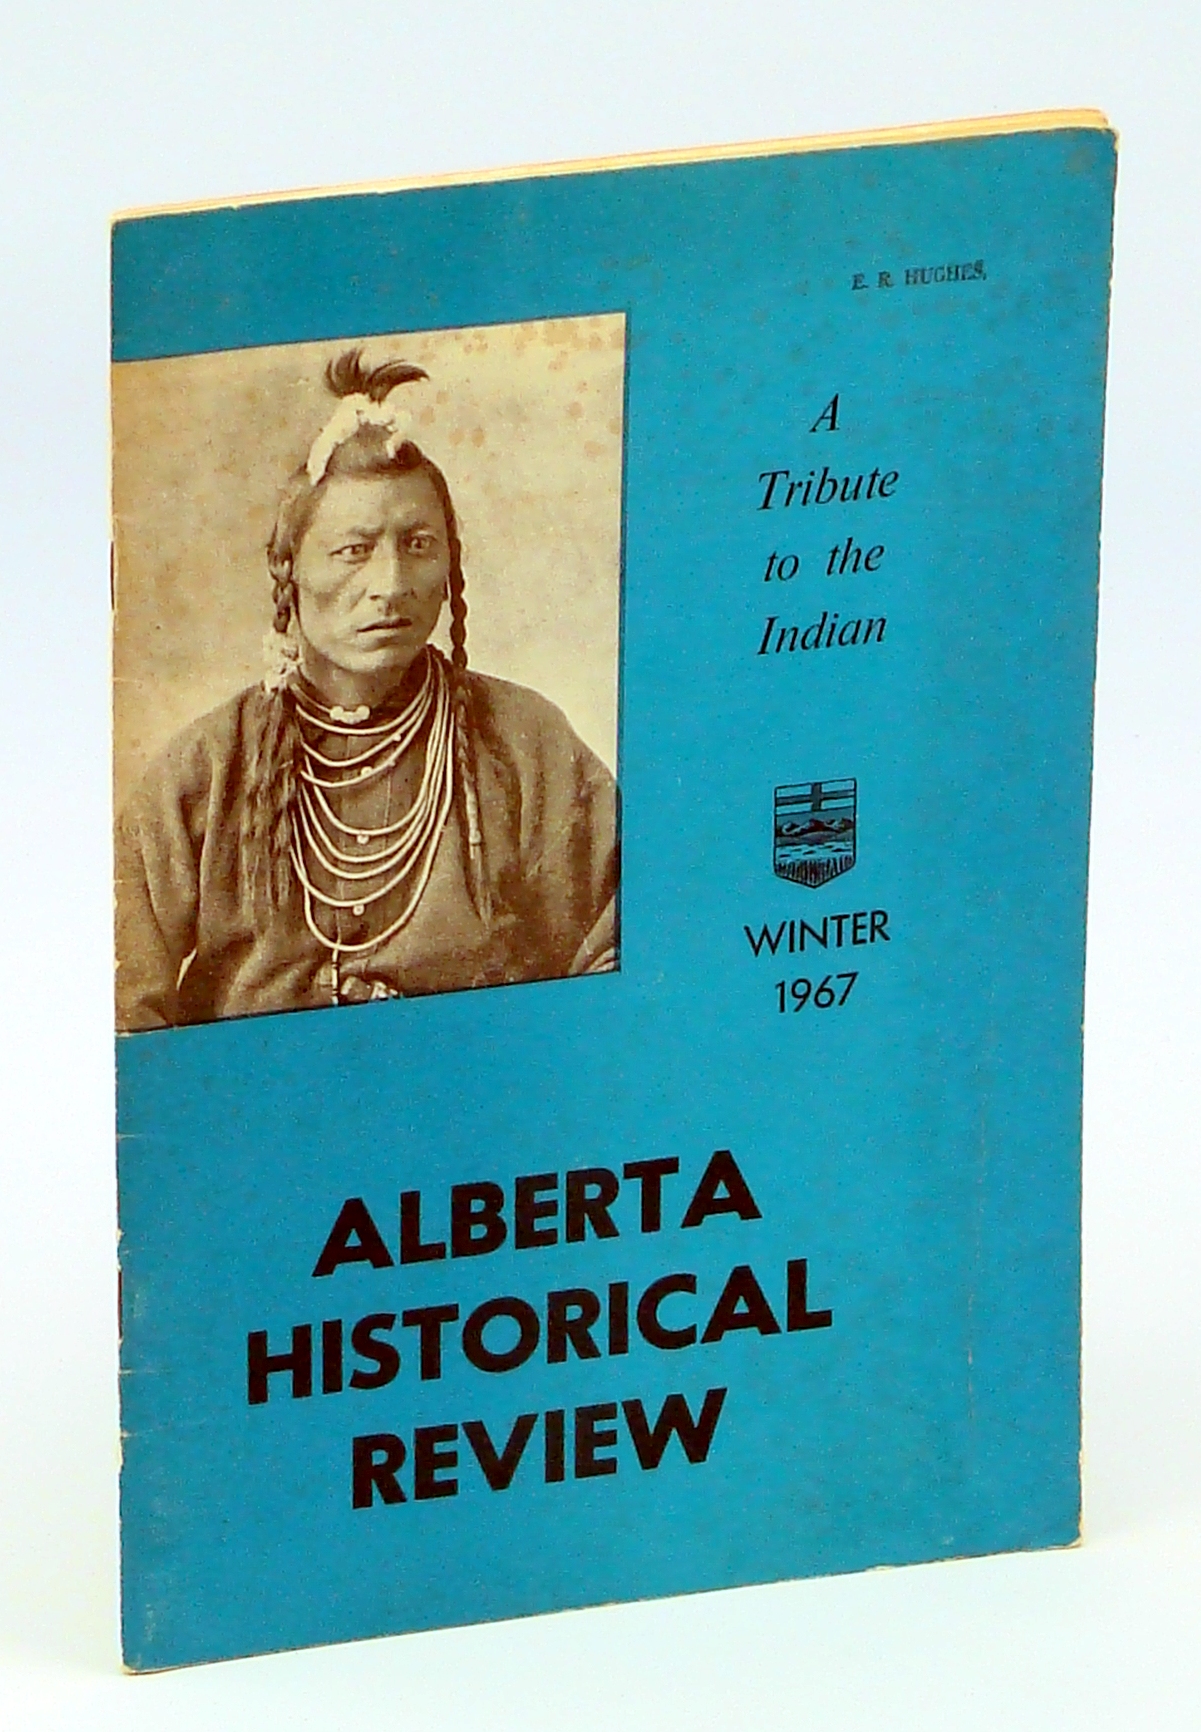 Image for Alberta Historical Review, Volume 15, Number 1, Winter 1967 - A Tribute To The Indian